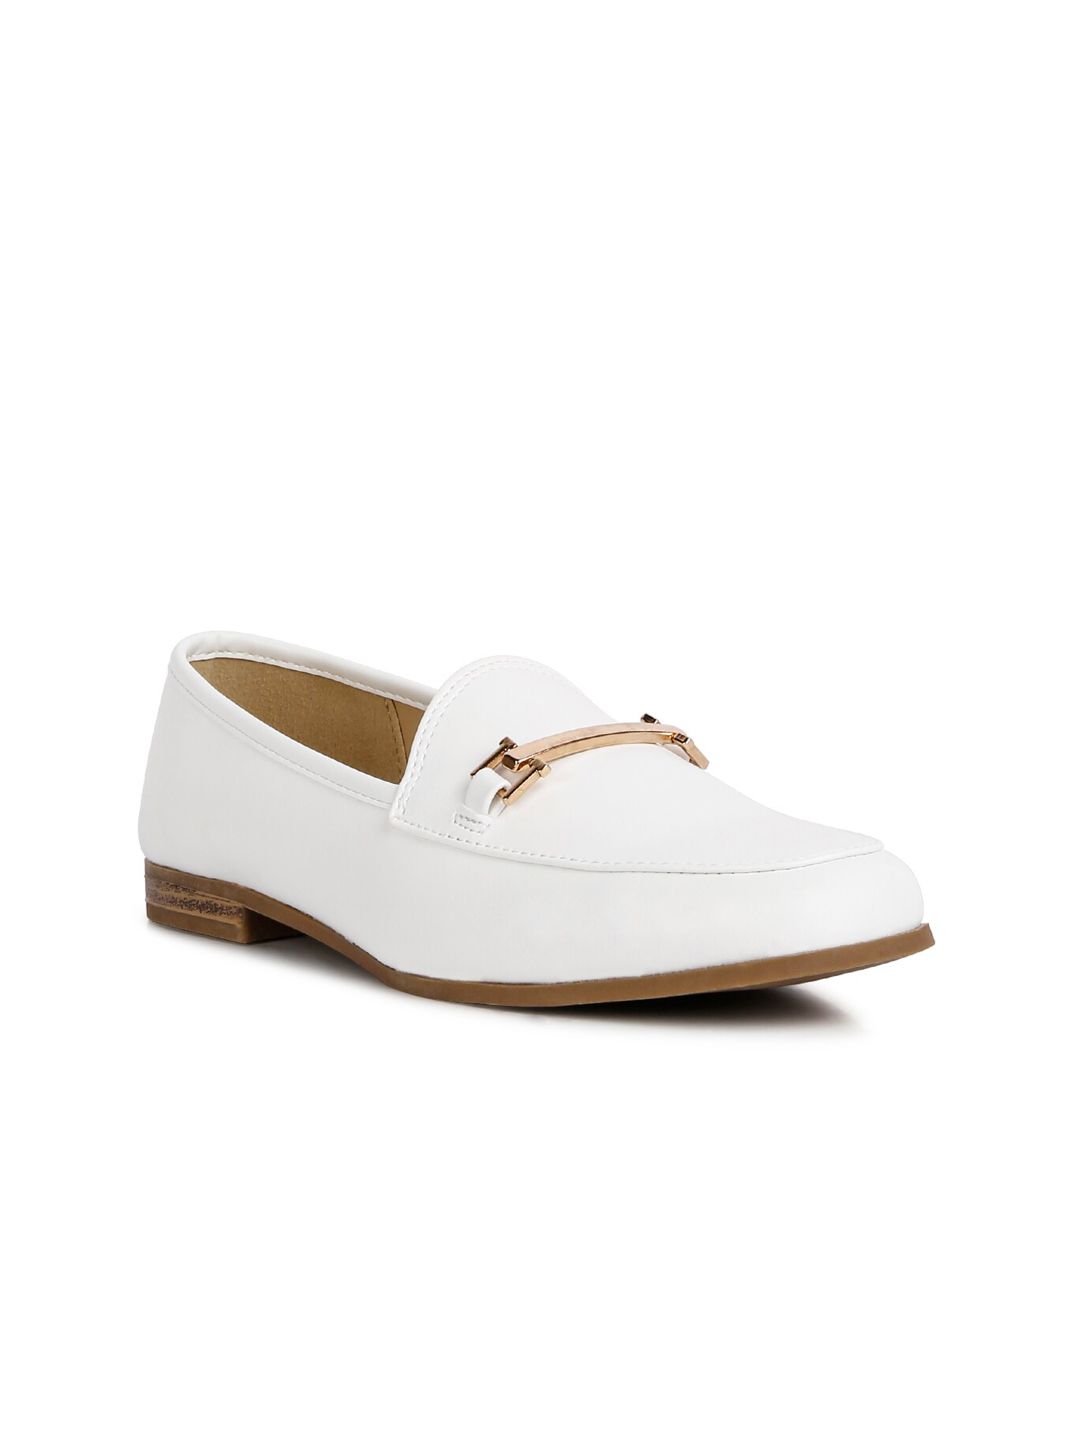 London Rag Women White PU Loafers Price in India